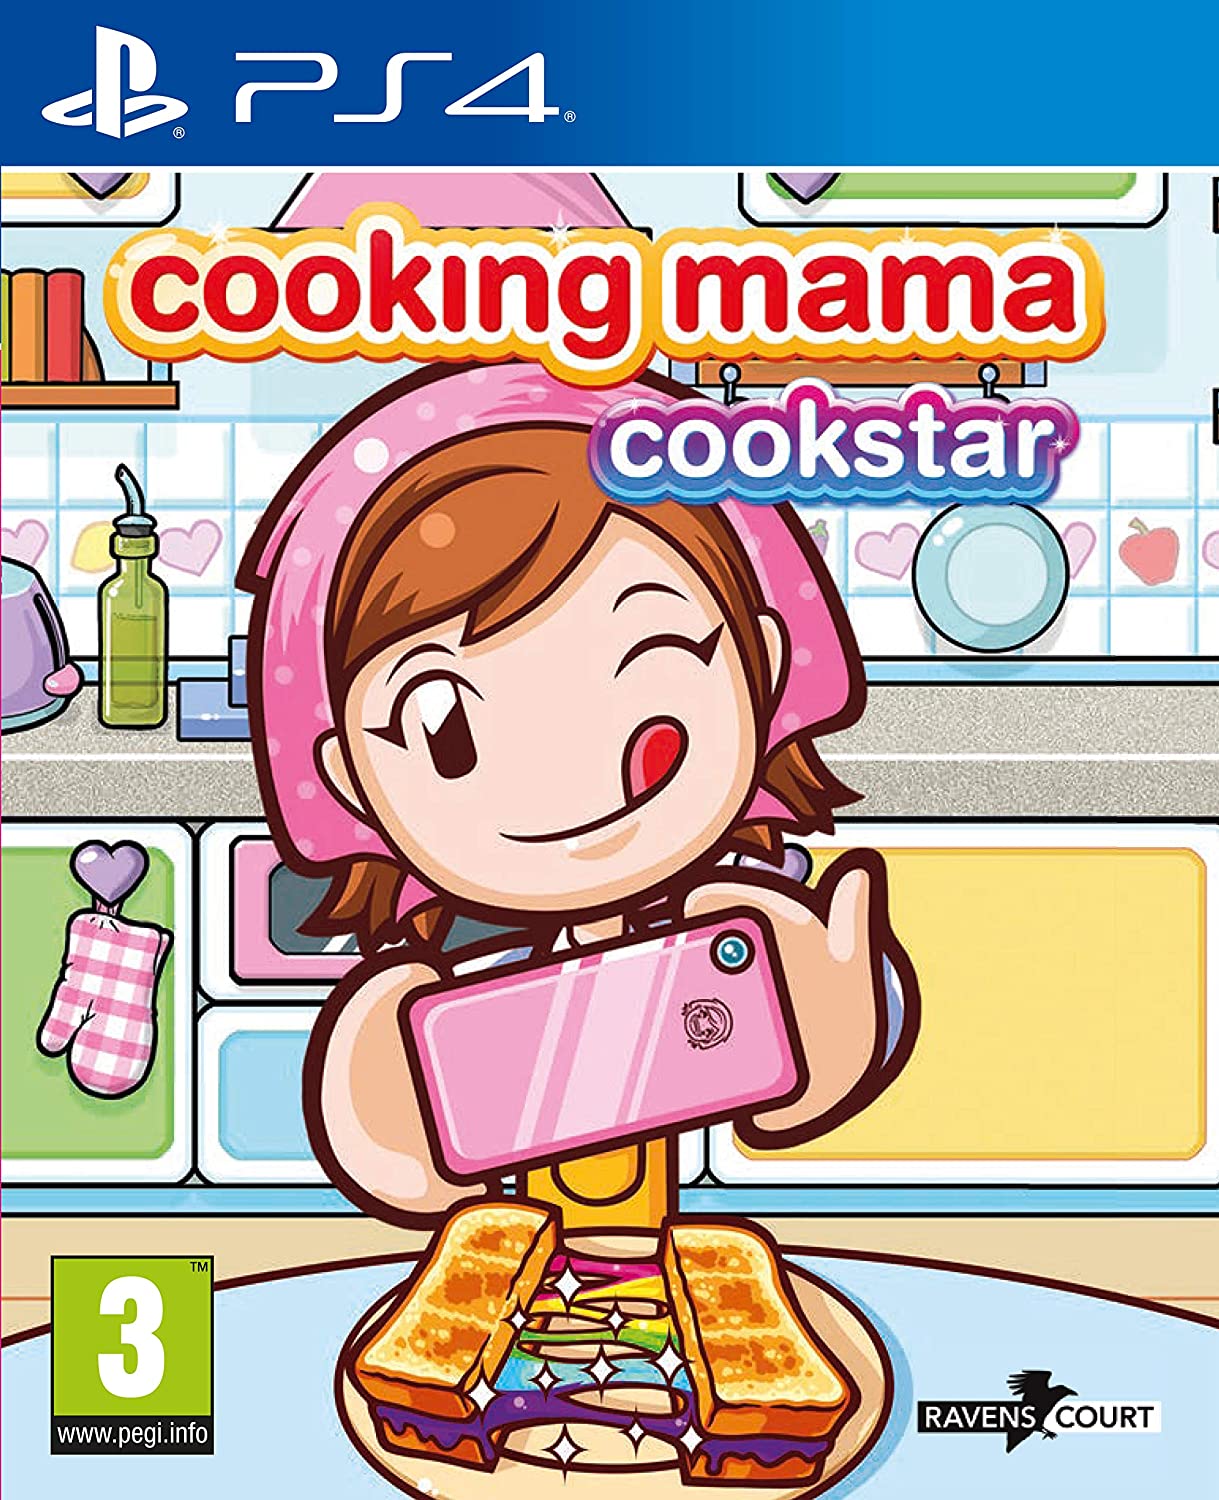 Cooking Mama Cookstar - PS4 | Yard's Games Ltd